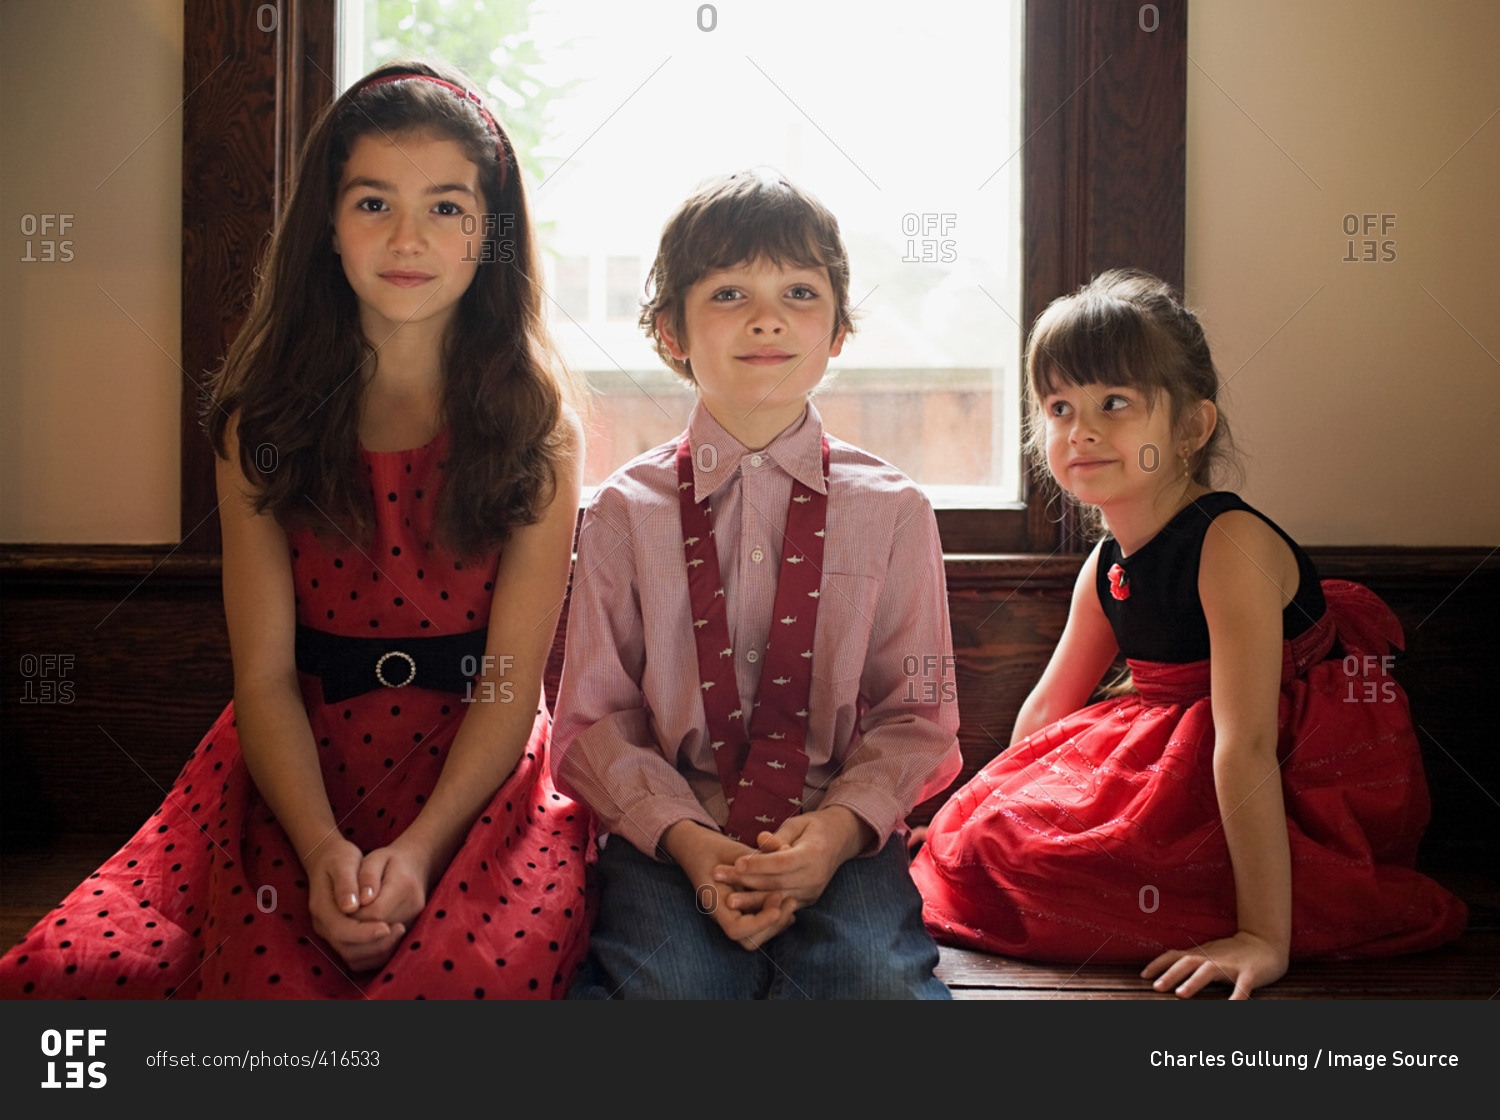 Portrait of children - Offset Collection stock photo - OFFSET